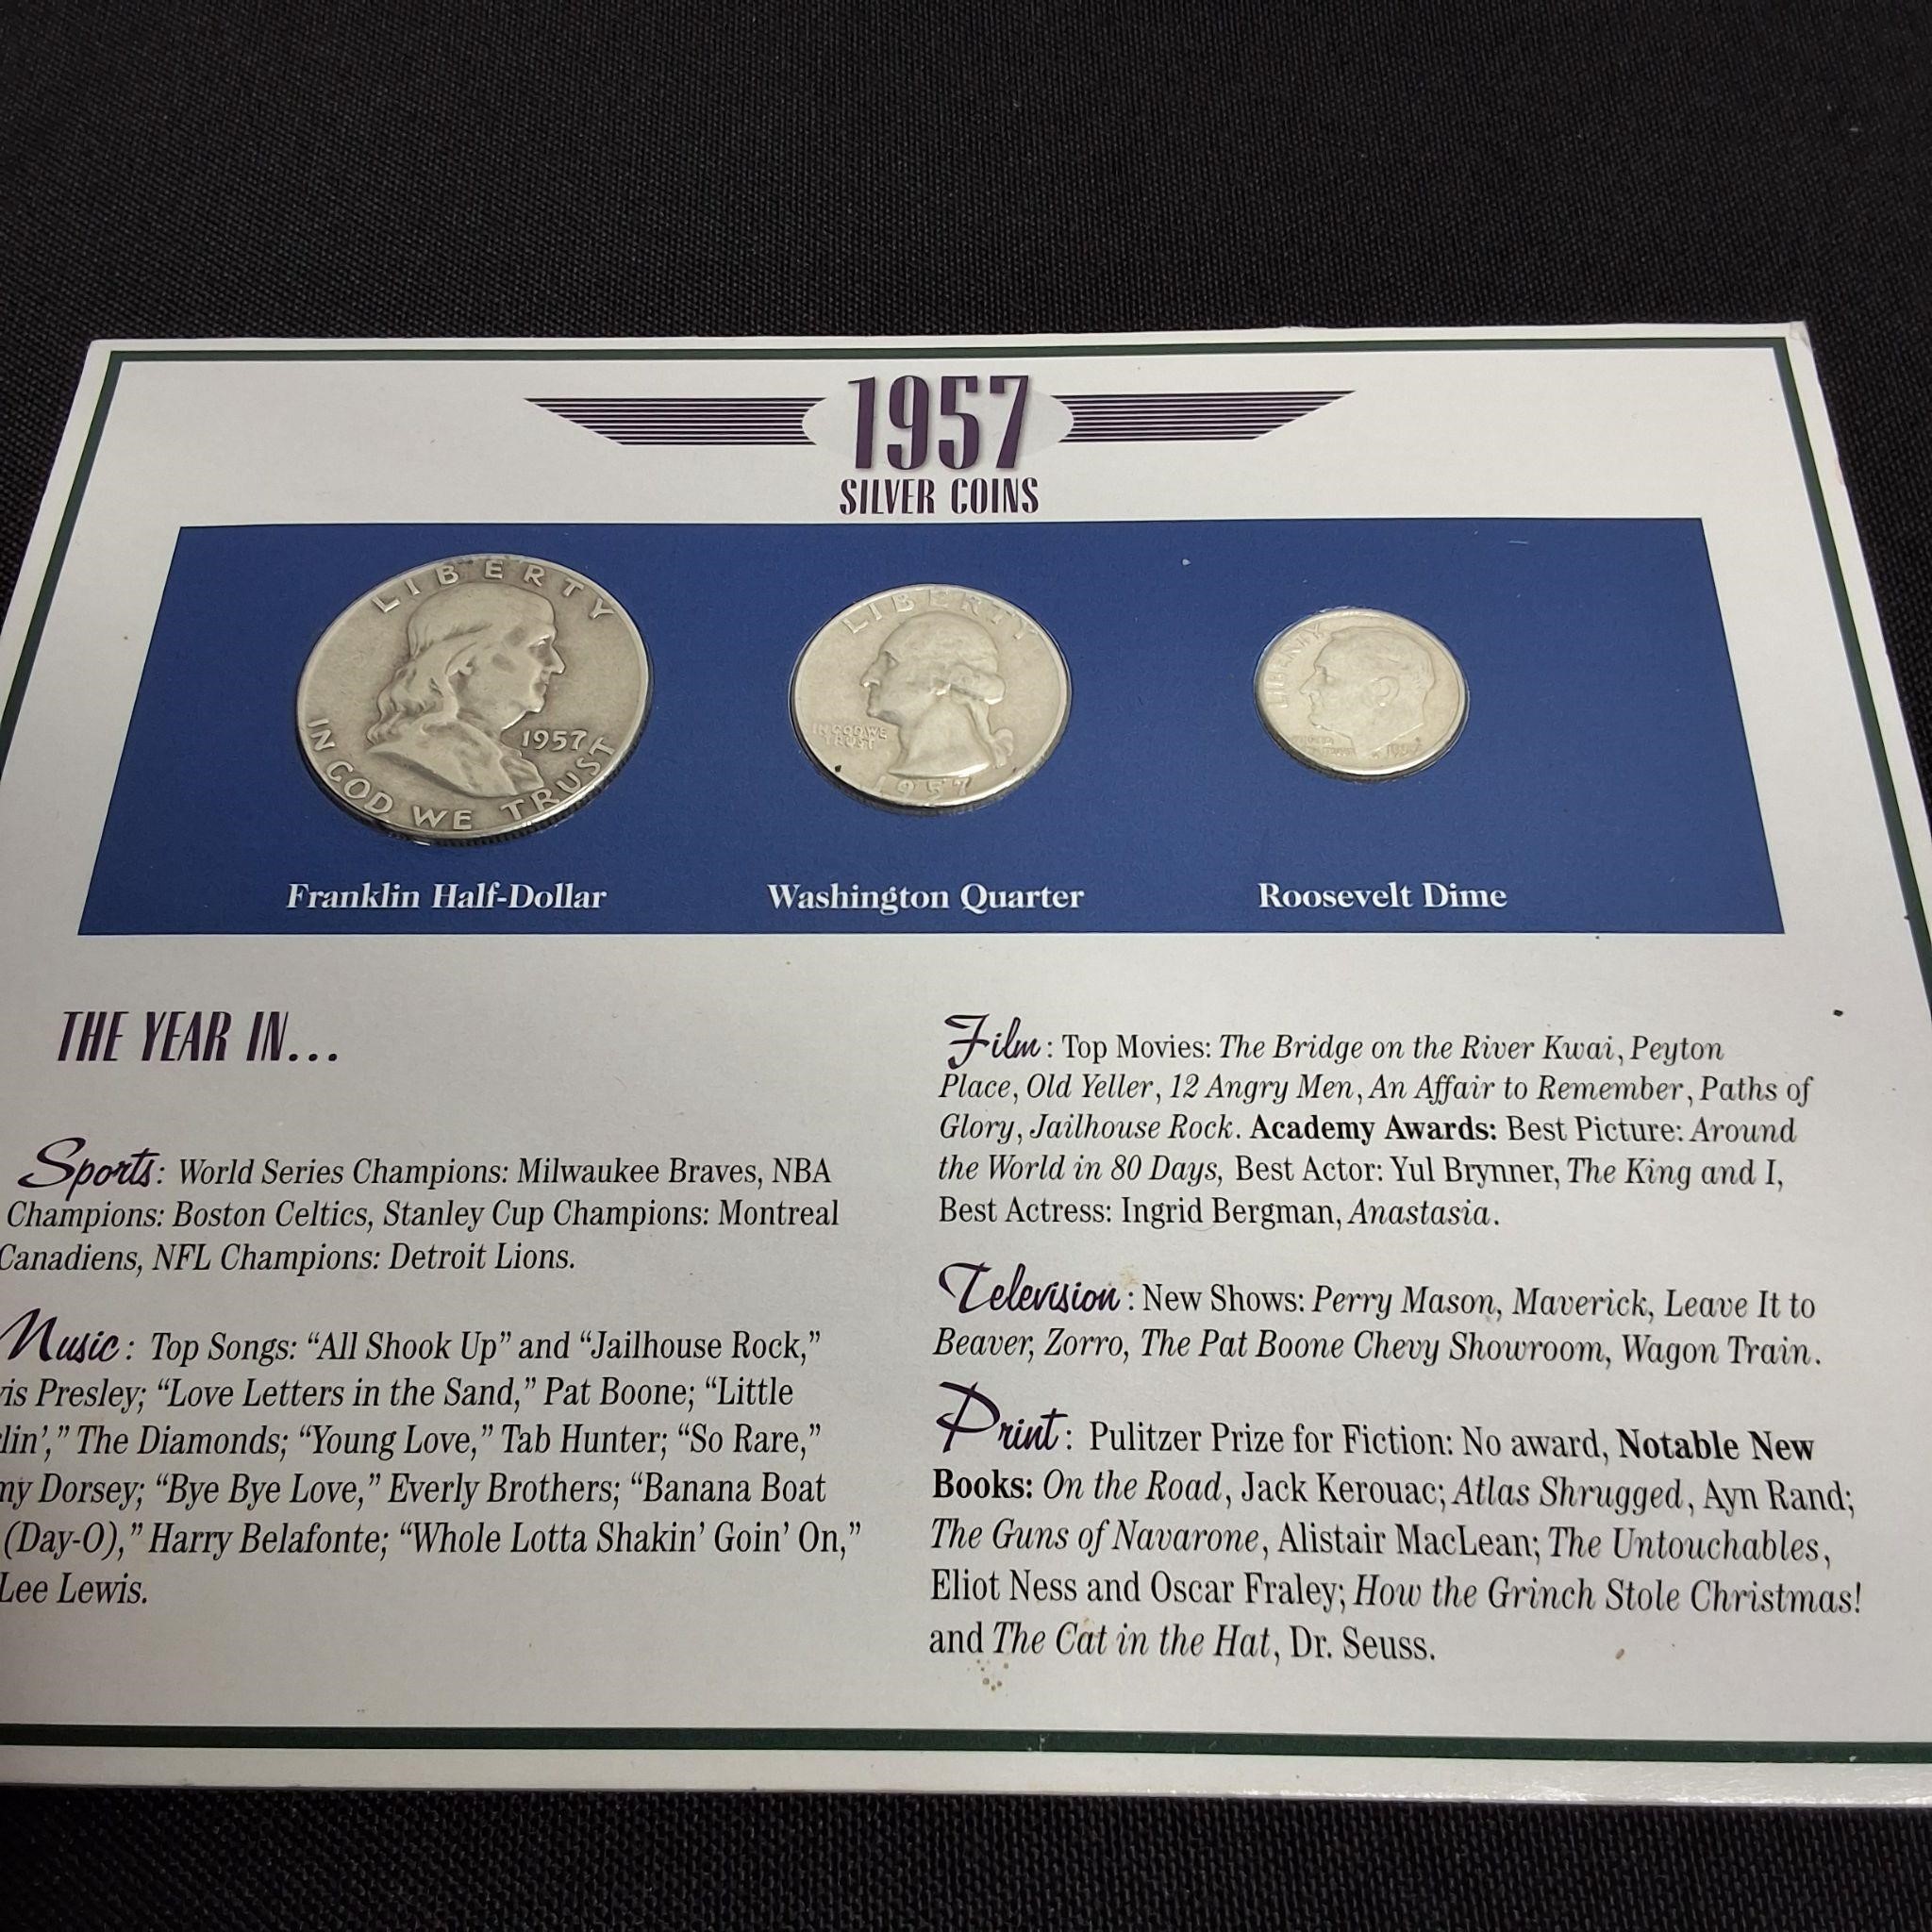 FREDERICKTOWN ONLINE ONLY COIN AND COLLECTIBLE COIN AUCTION